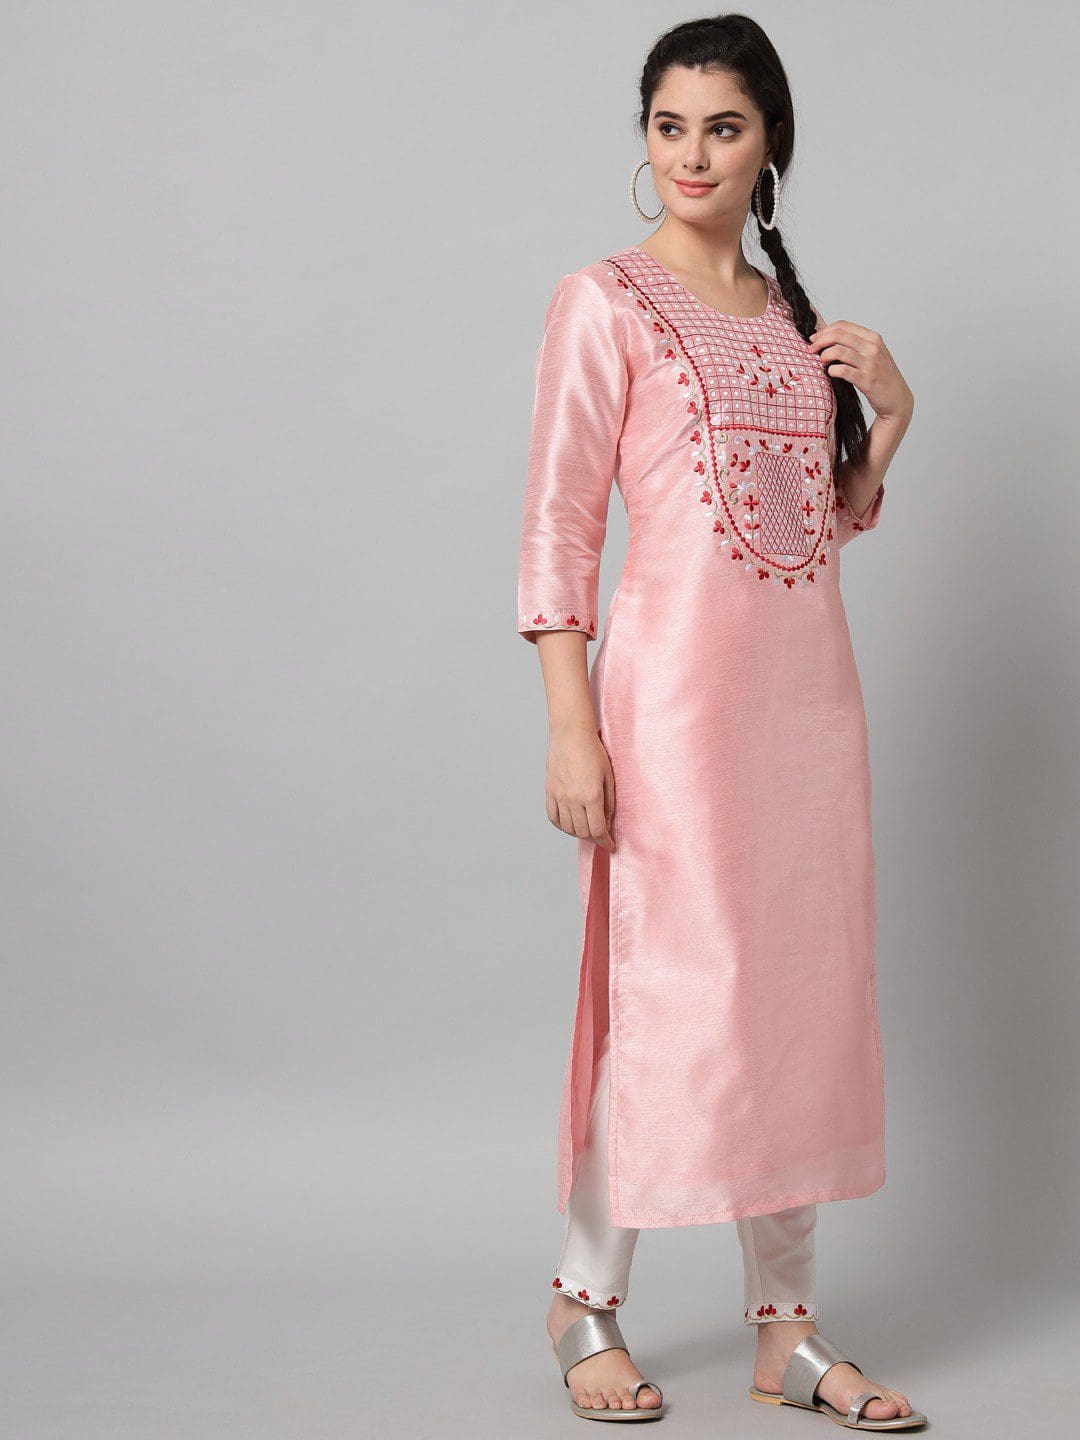 lovely Dupion Silk Party Wear kurta set in Pink and Majenta color with Floral work for women